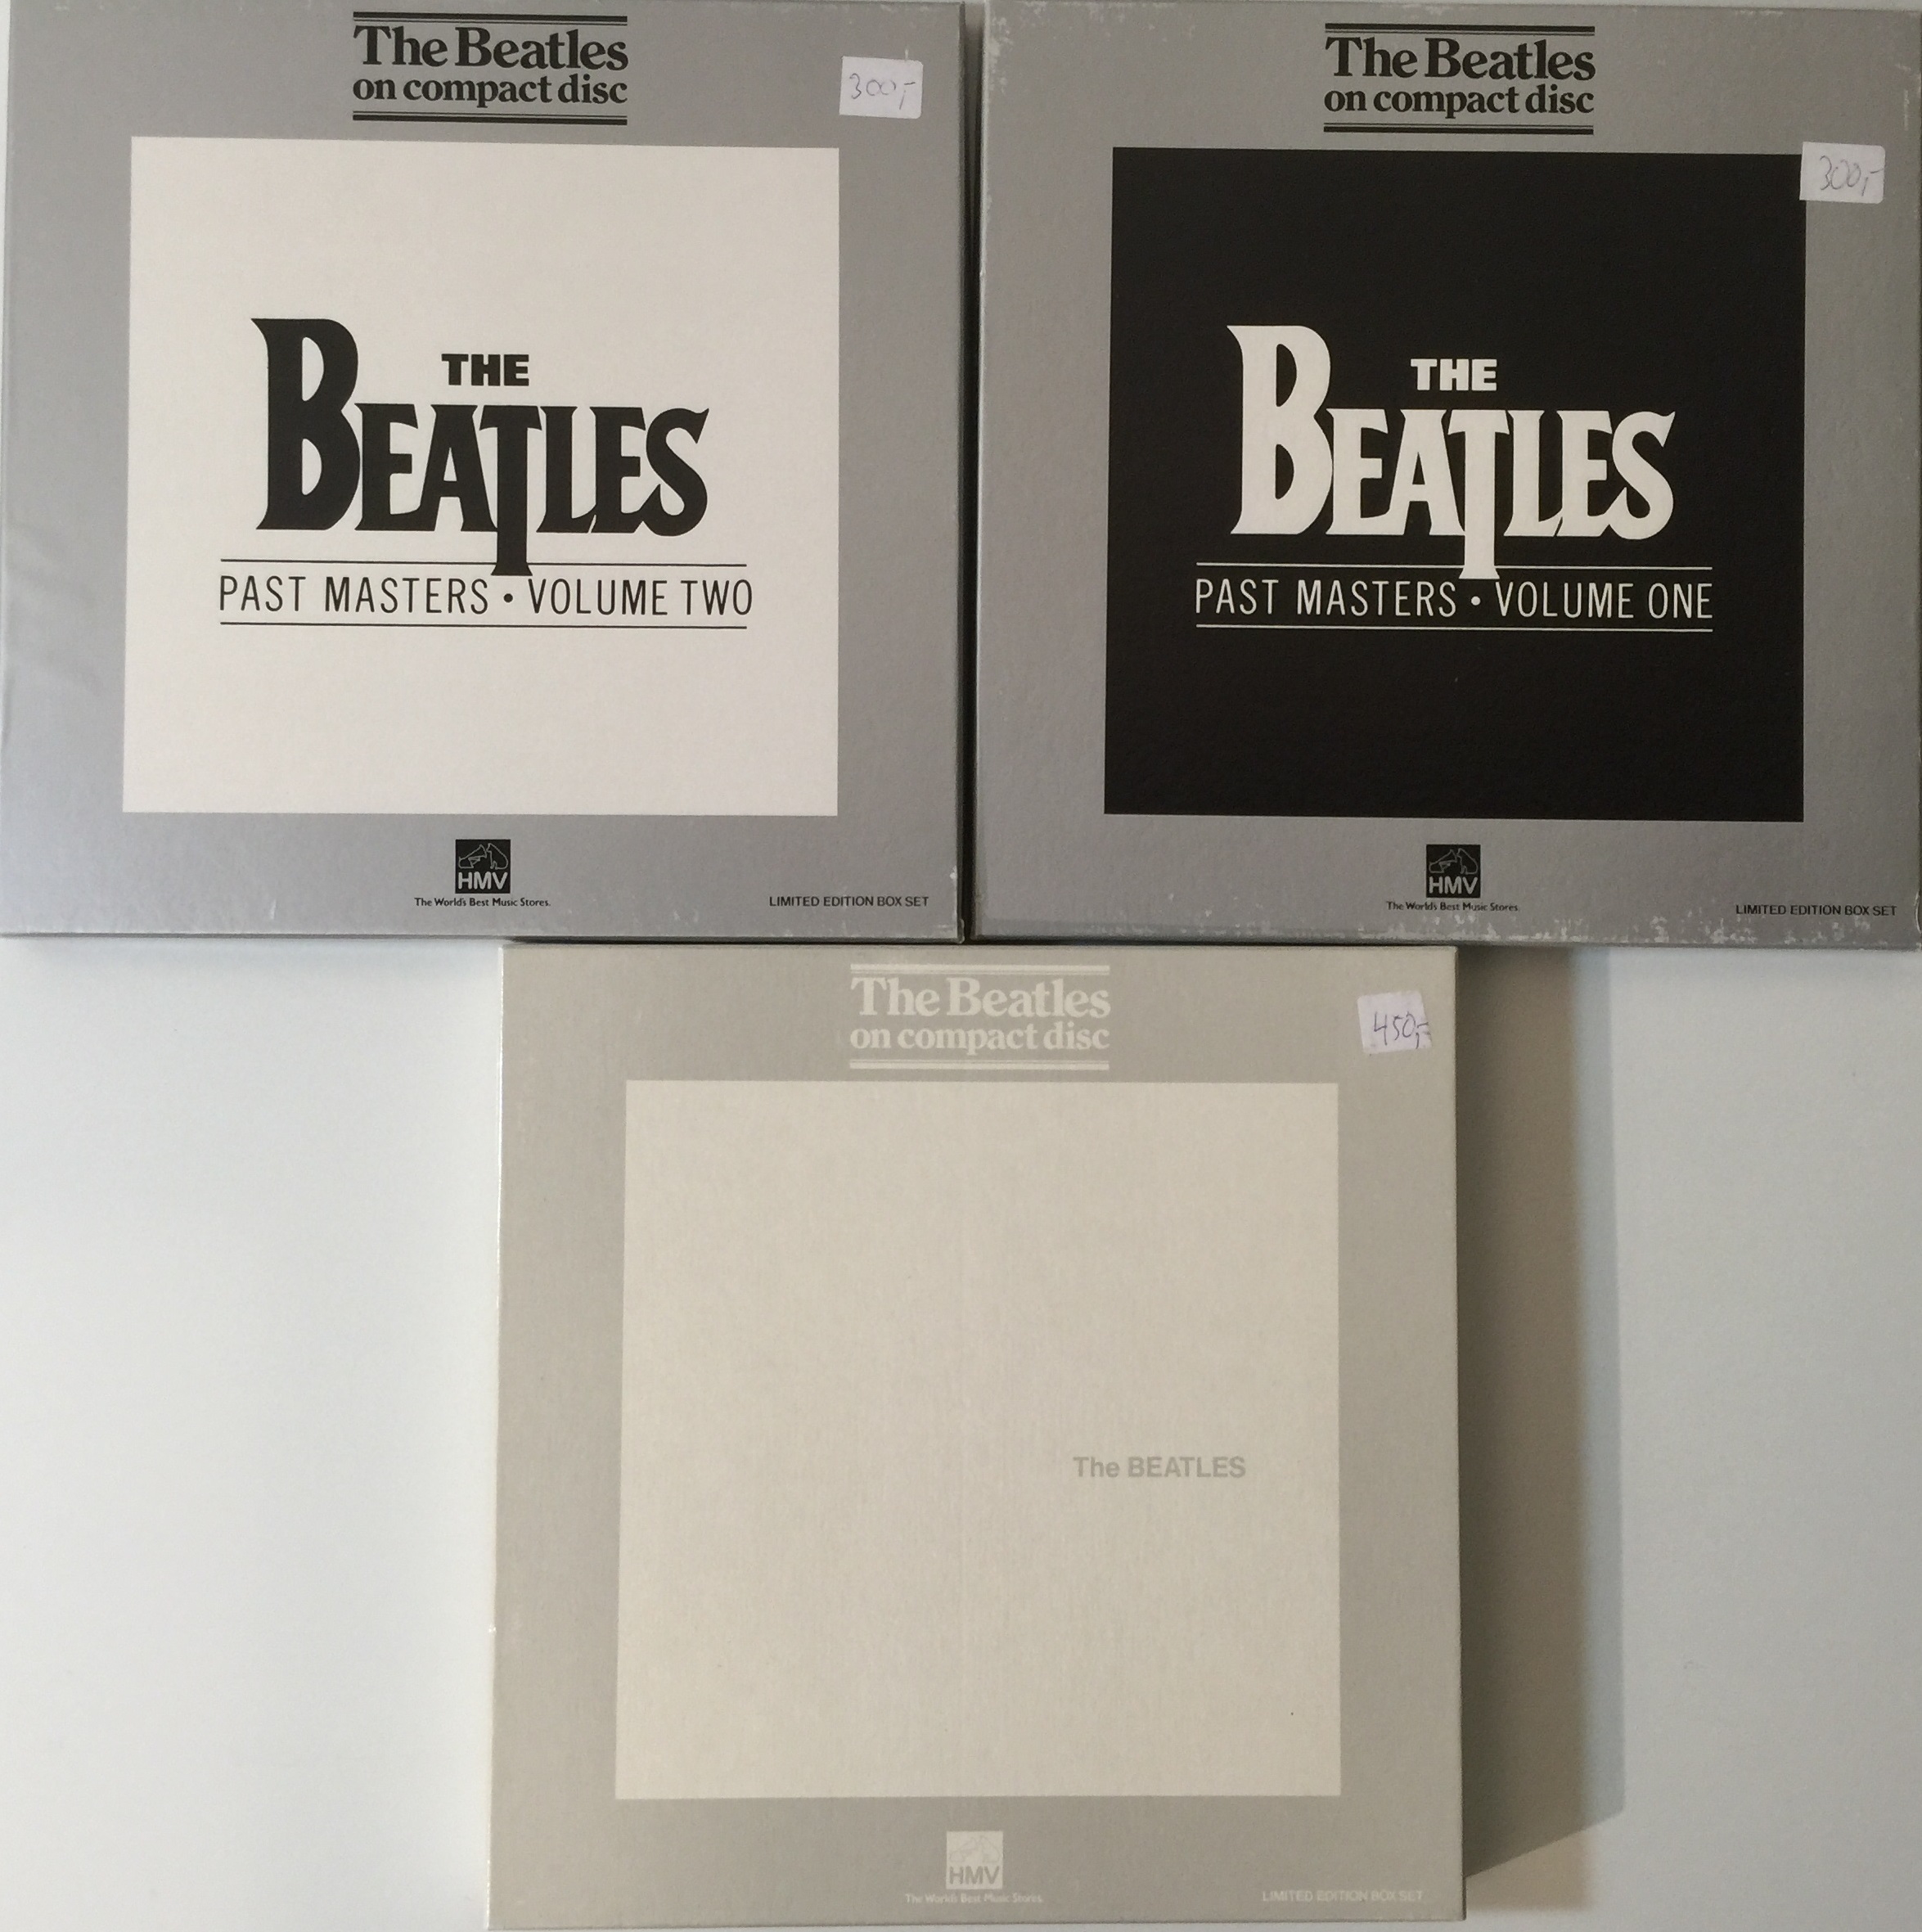 THE BEATLES - ON COMPACT DISC COLLECTION - BOX SETS.